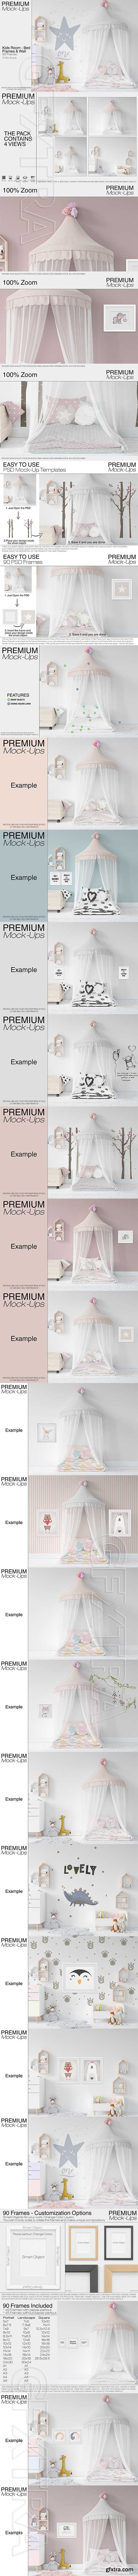 CreativeMarket - Kids Bed with Drapery Wall & Frames 2483358